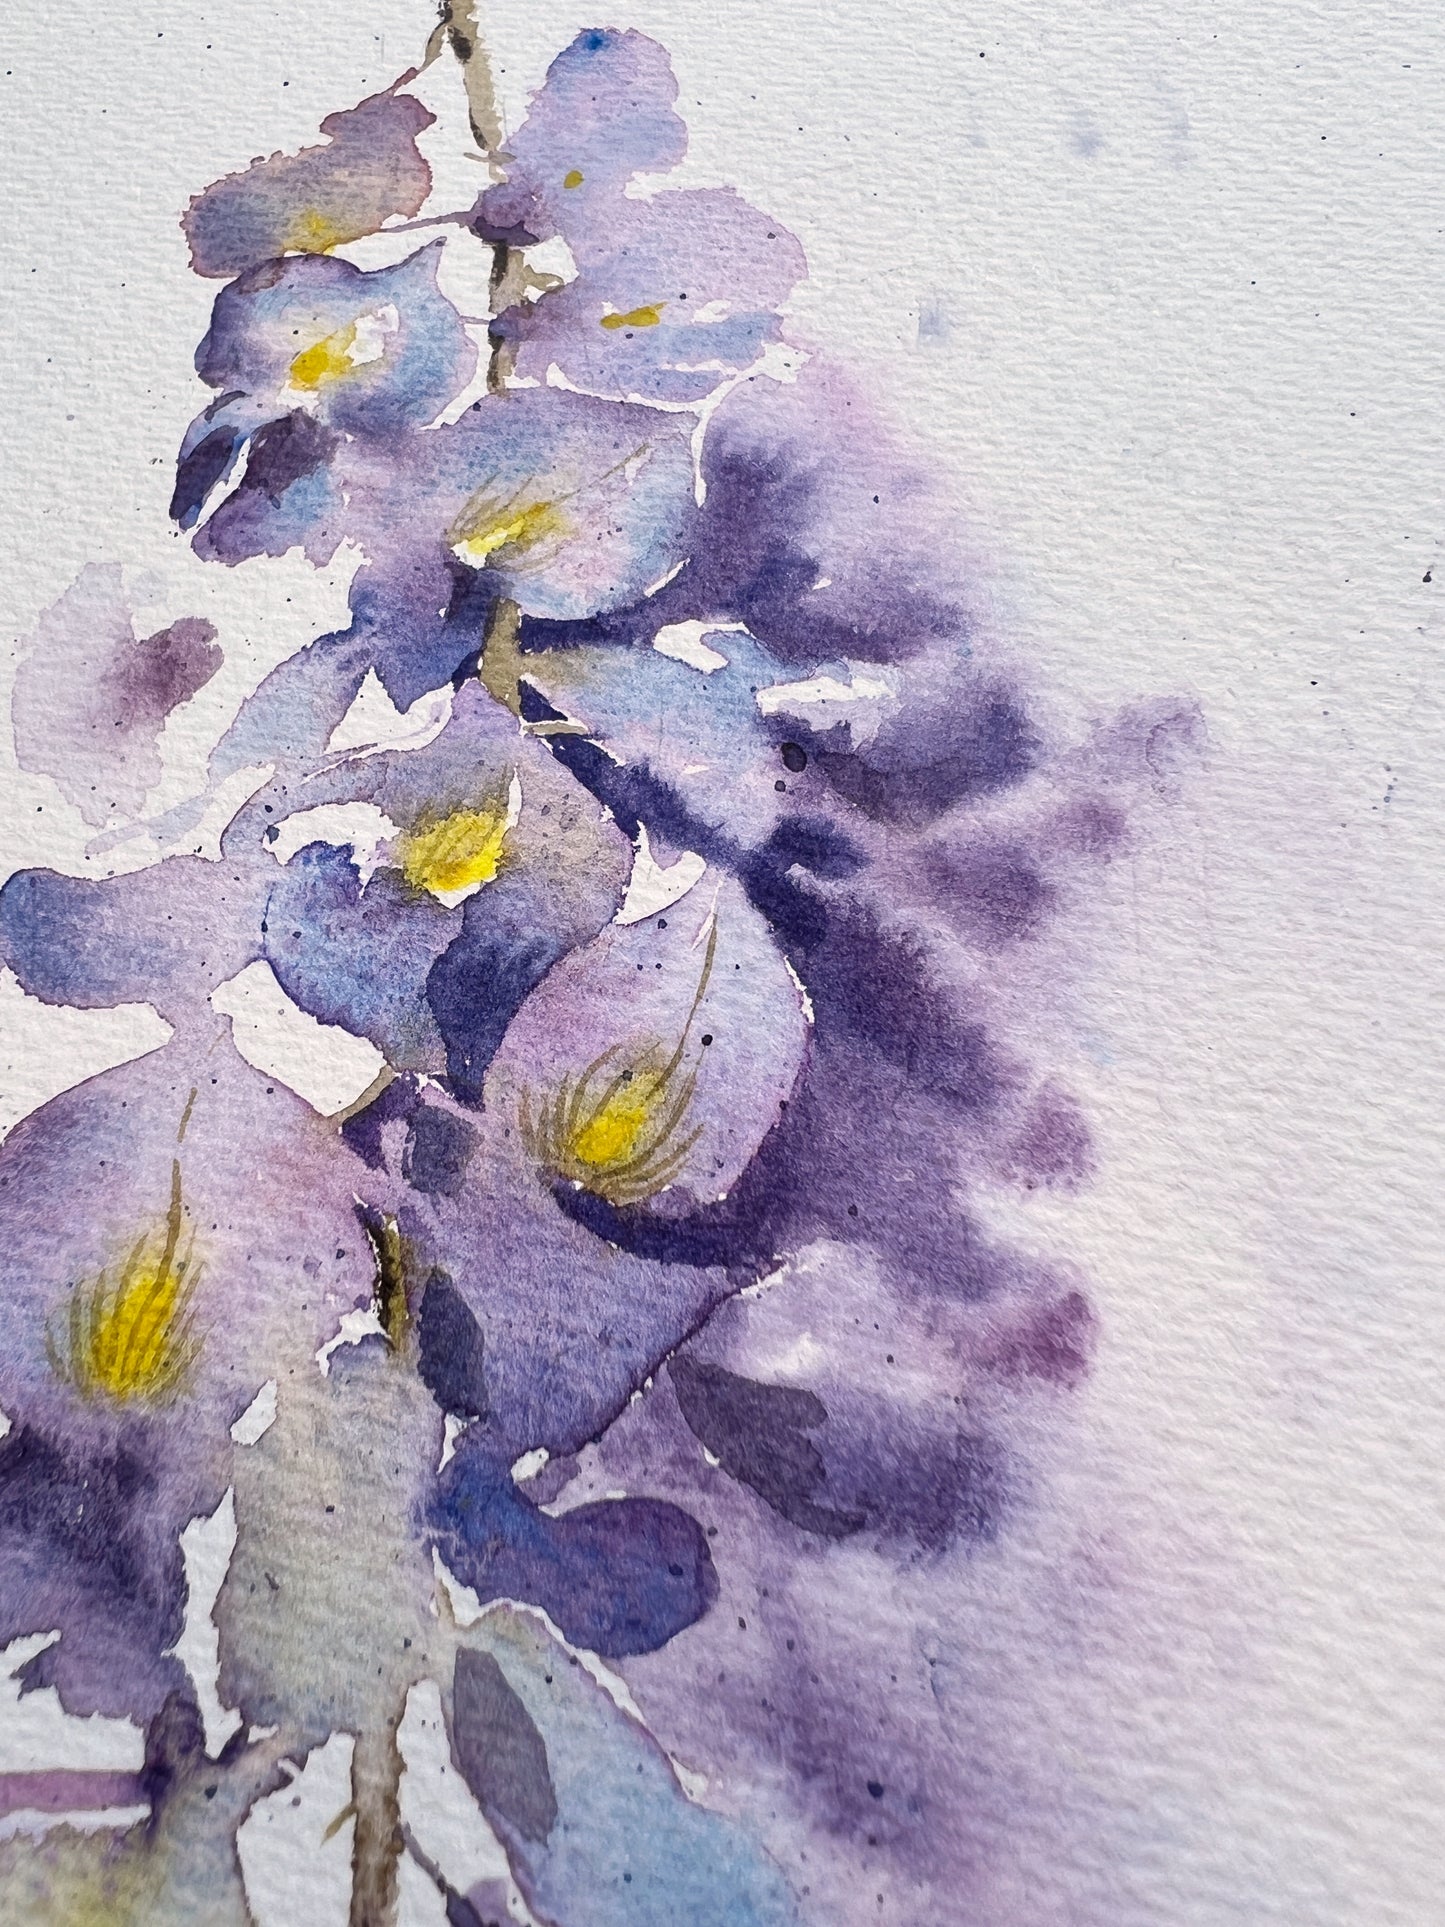 Wisteria Painting, Watercolor Flower Original Art, Lilac flowers Wall Decor, Botanical Illustration, Gift Ideas